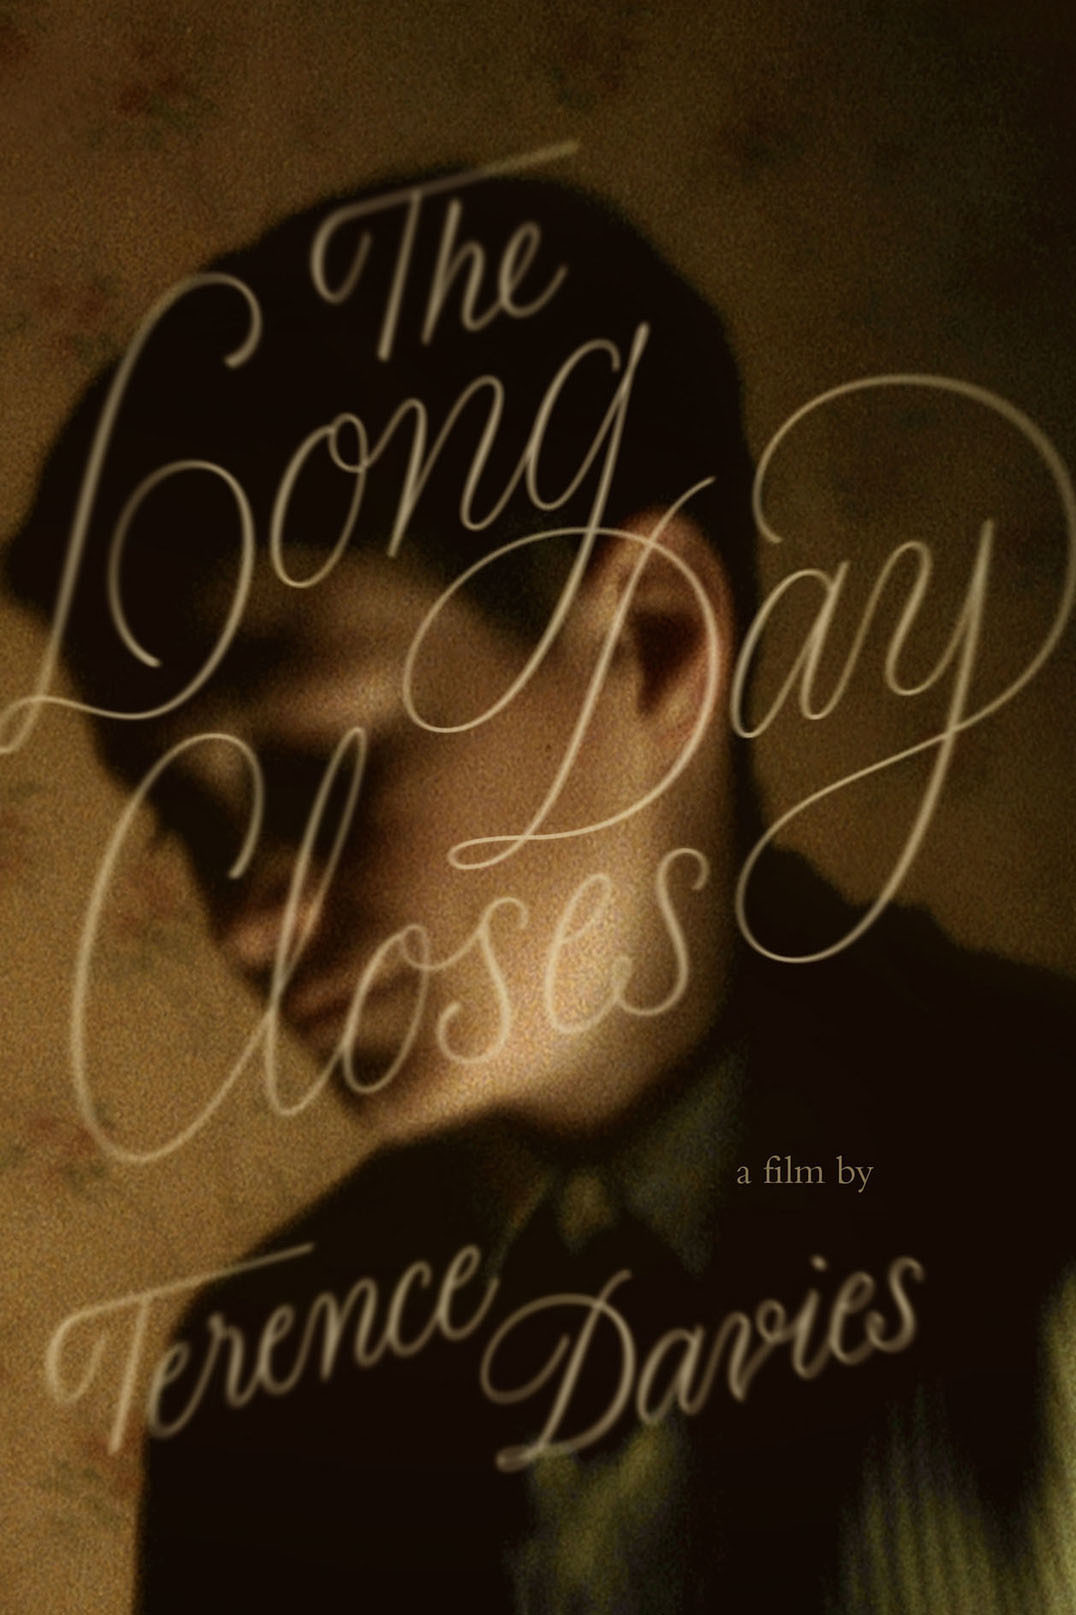 The Long Day Closes Poster